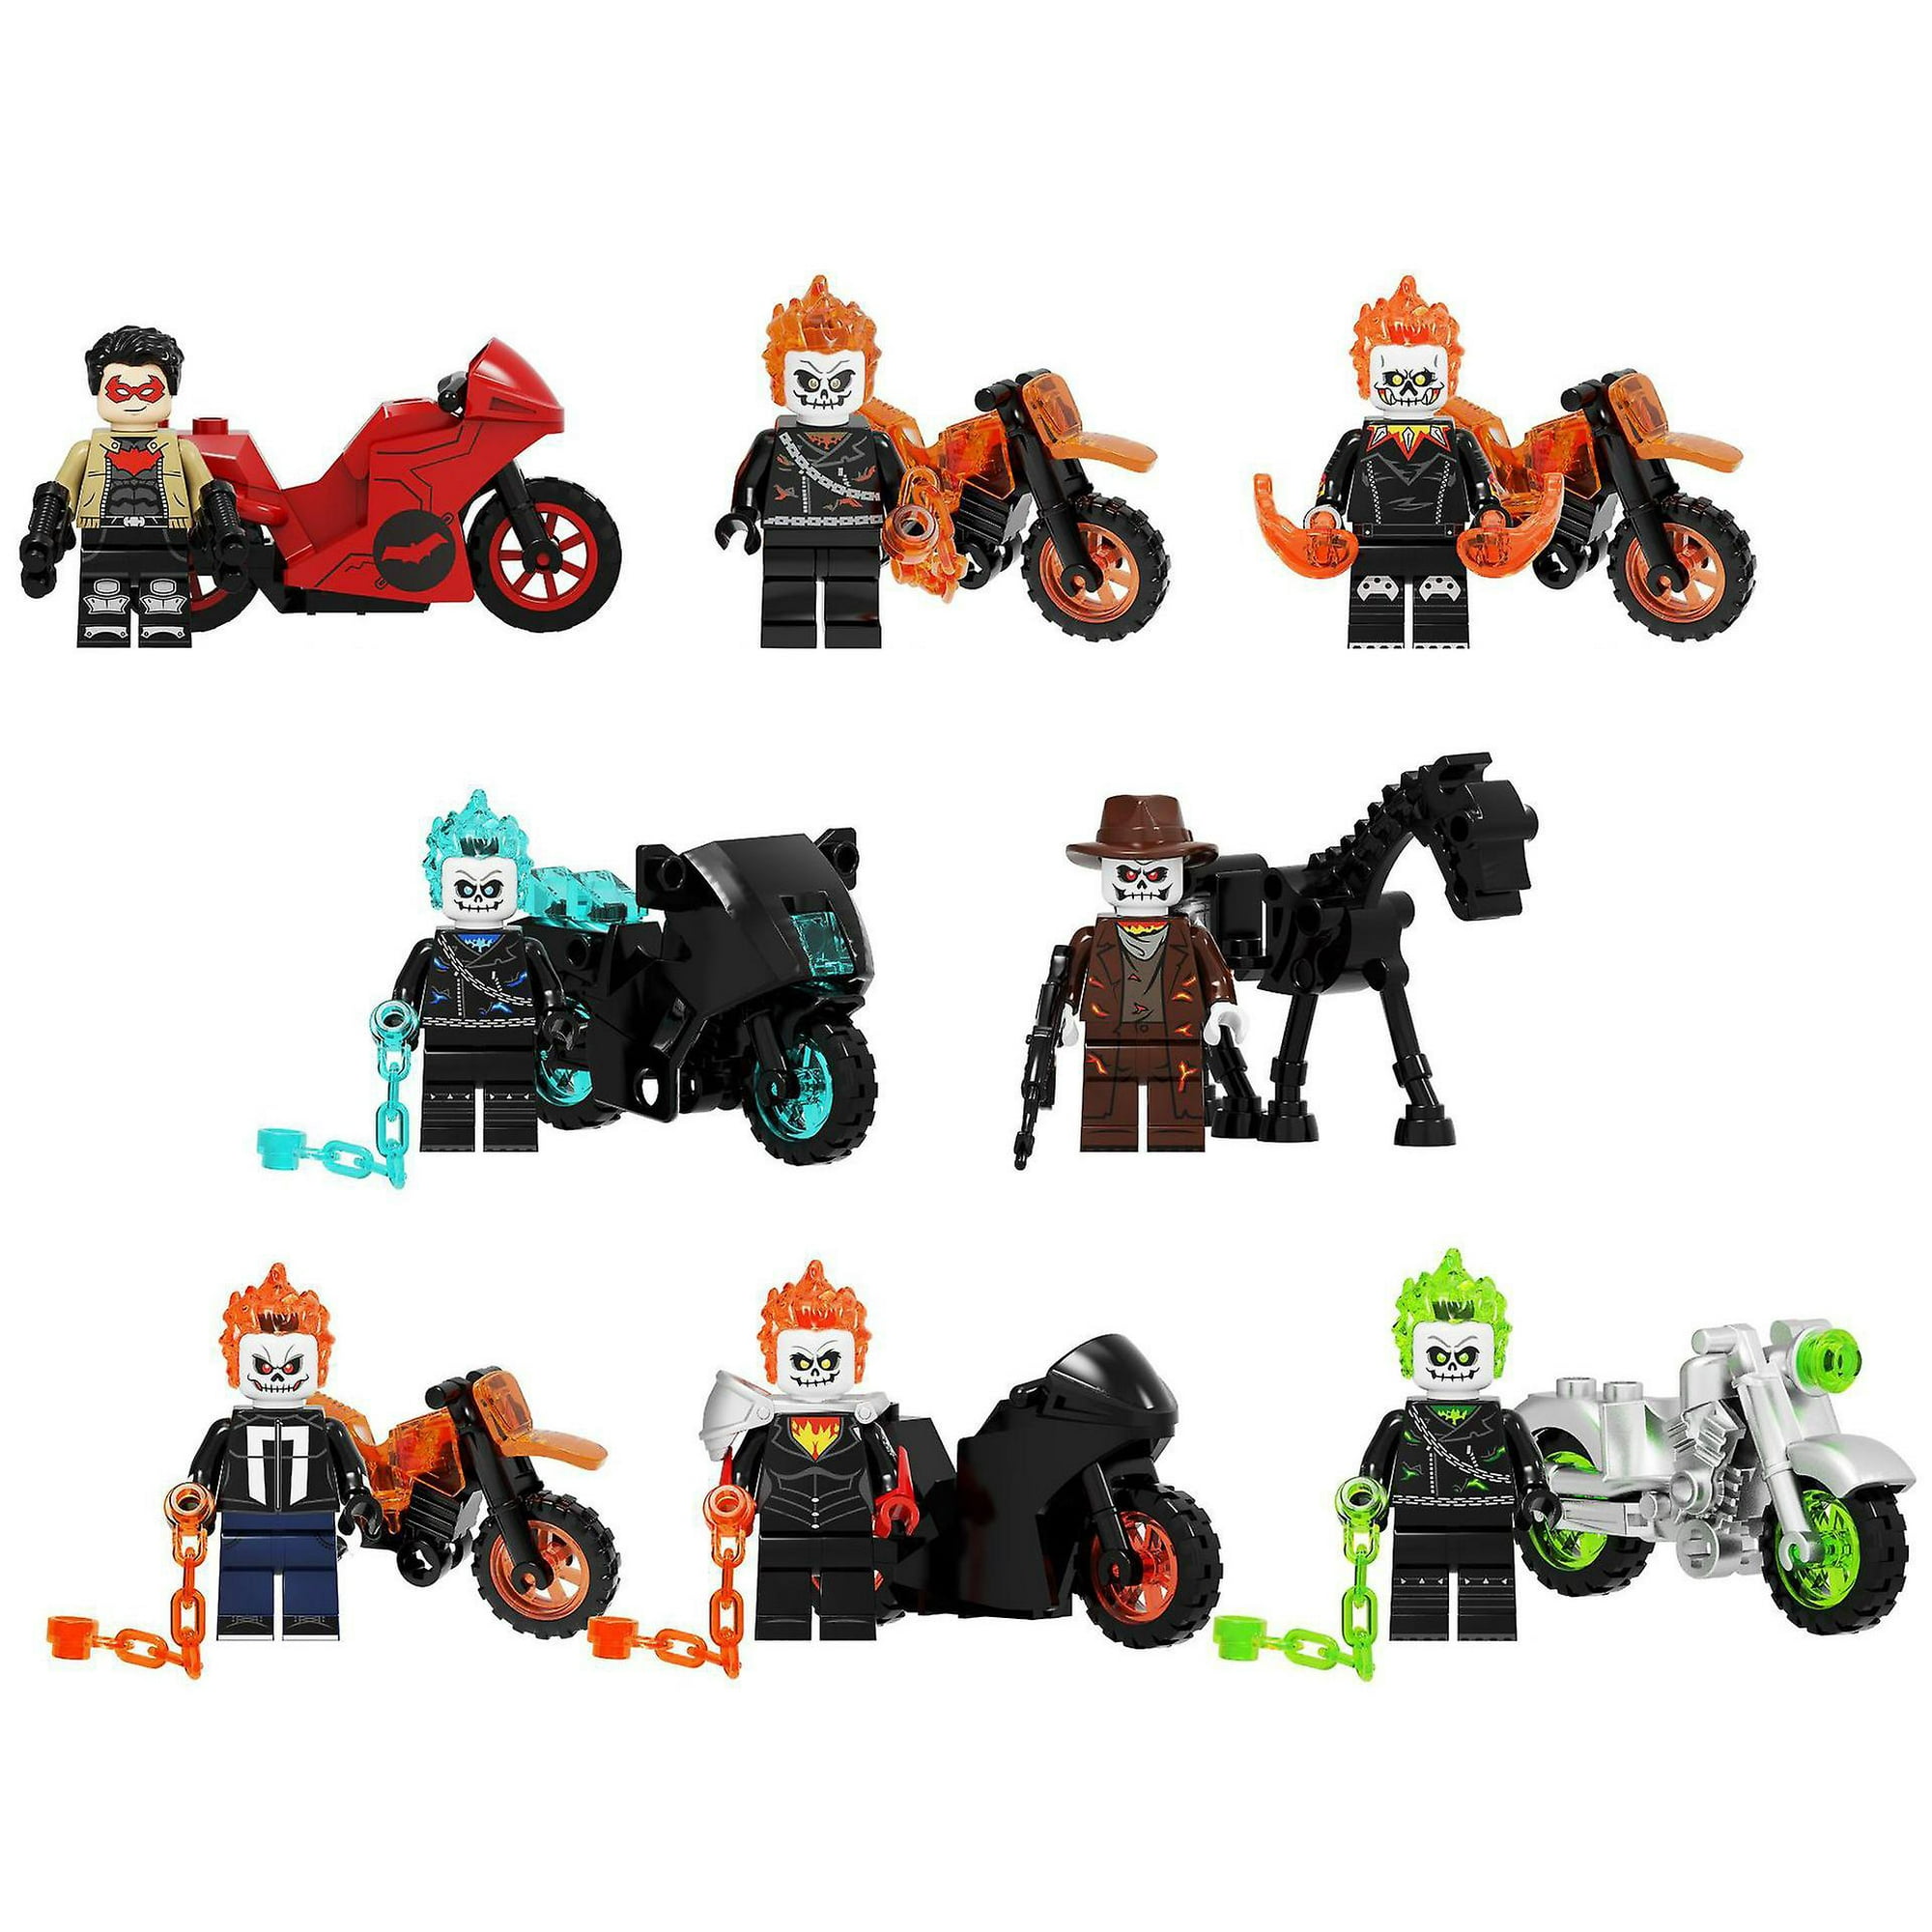 FanShow 8pcs Ghost Rider Set Build Blocks Toys For Kids Adult Christmas  Homecoming Gift8pcs Ghost Rider Set Build Blocks Toys For Kids Adult  Christmas Homecoming Gift | Walmart Canada